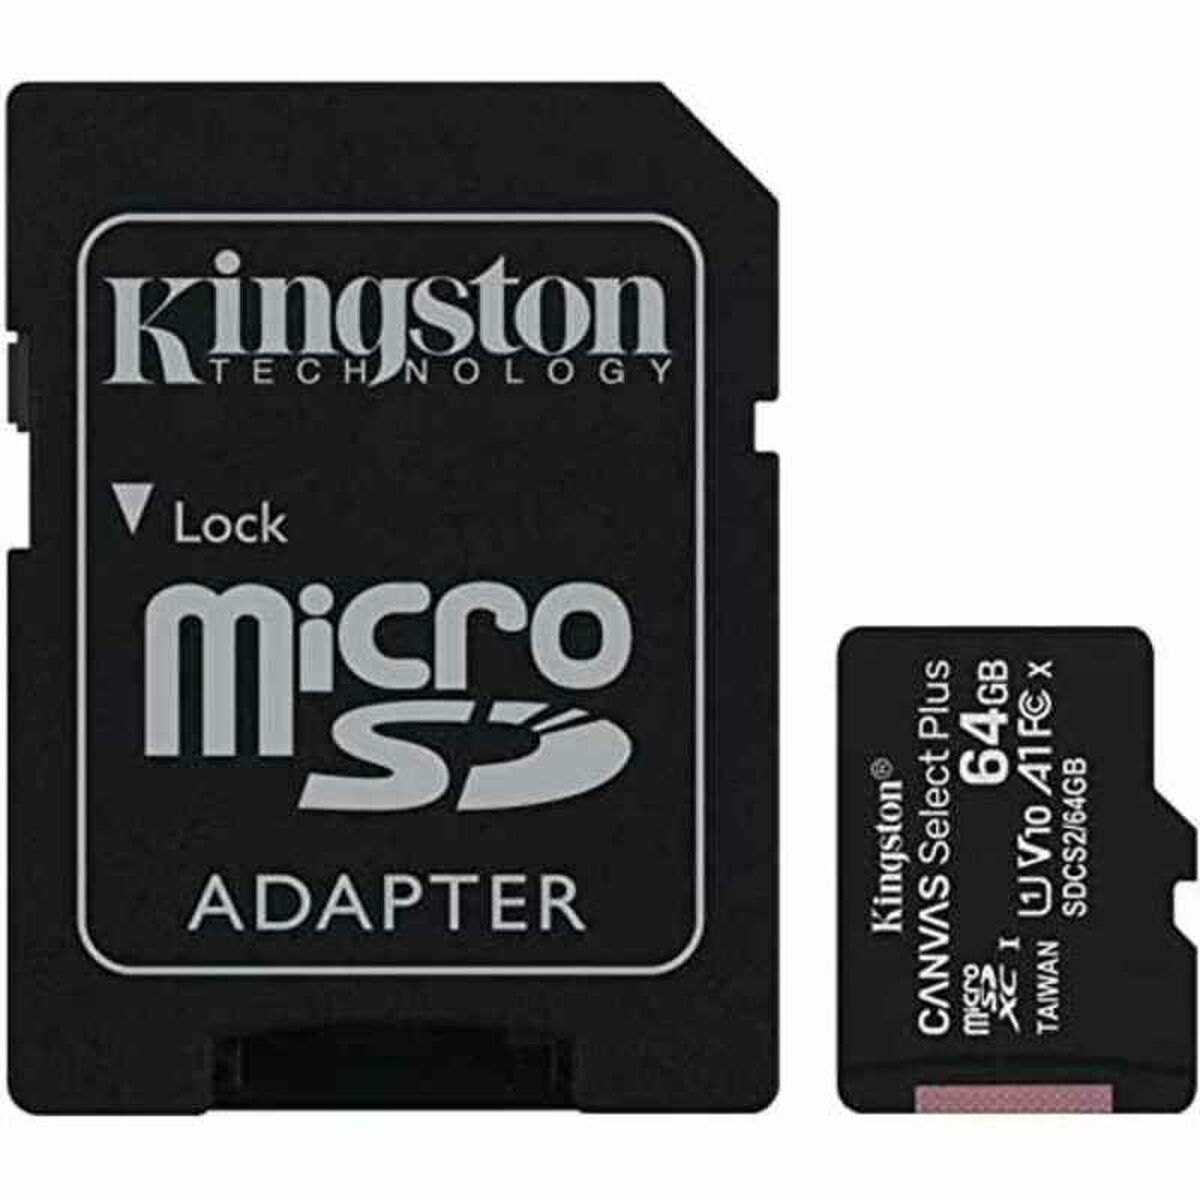 Micro SD Memory Card with Adaptor Kingston exFAT, Kingston, Computing, Data storage, micro-sd-memory-card-with-adaptor-kingston-exfat, :128 GB, :32 GB, :64 GB, Brand_Kingston, Capacity_128 GB, Capacity_32 GB, Capacity_64 GB, category-reference-2609, category-reference-2803, category-reference-2813, category-reference-t-19685, category-reference-t-19909, category-reference-t-21355, category-reference-t-25632, computers / components, Condition_NEW, Price_20 - 50, Teleworking, RiotNook